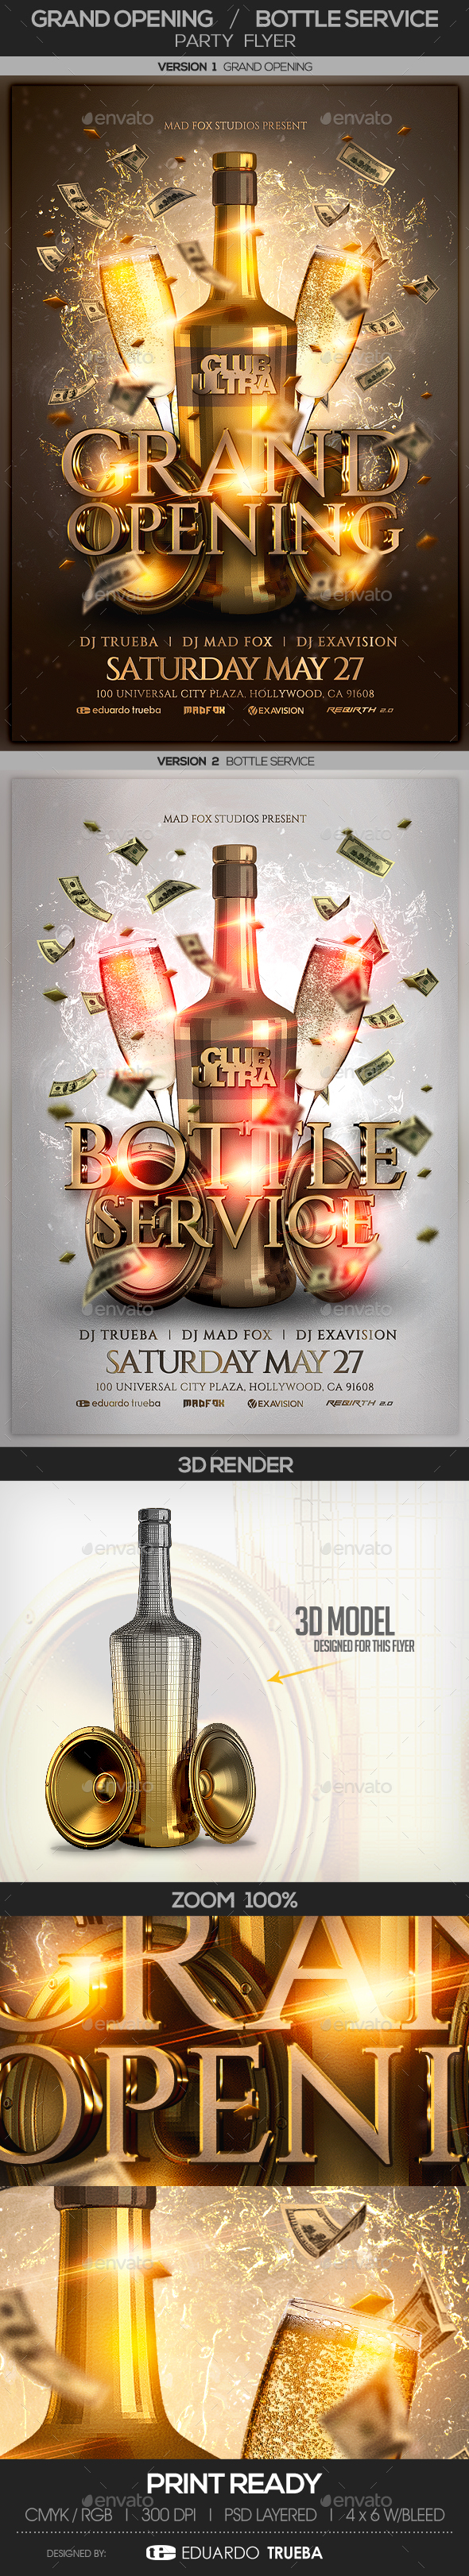 Grand Opening & Bottle Service Party Flyer